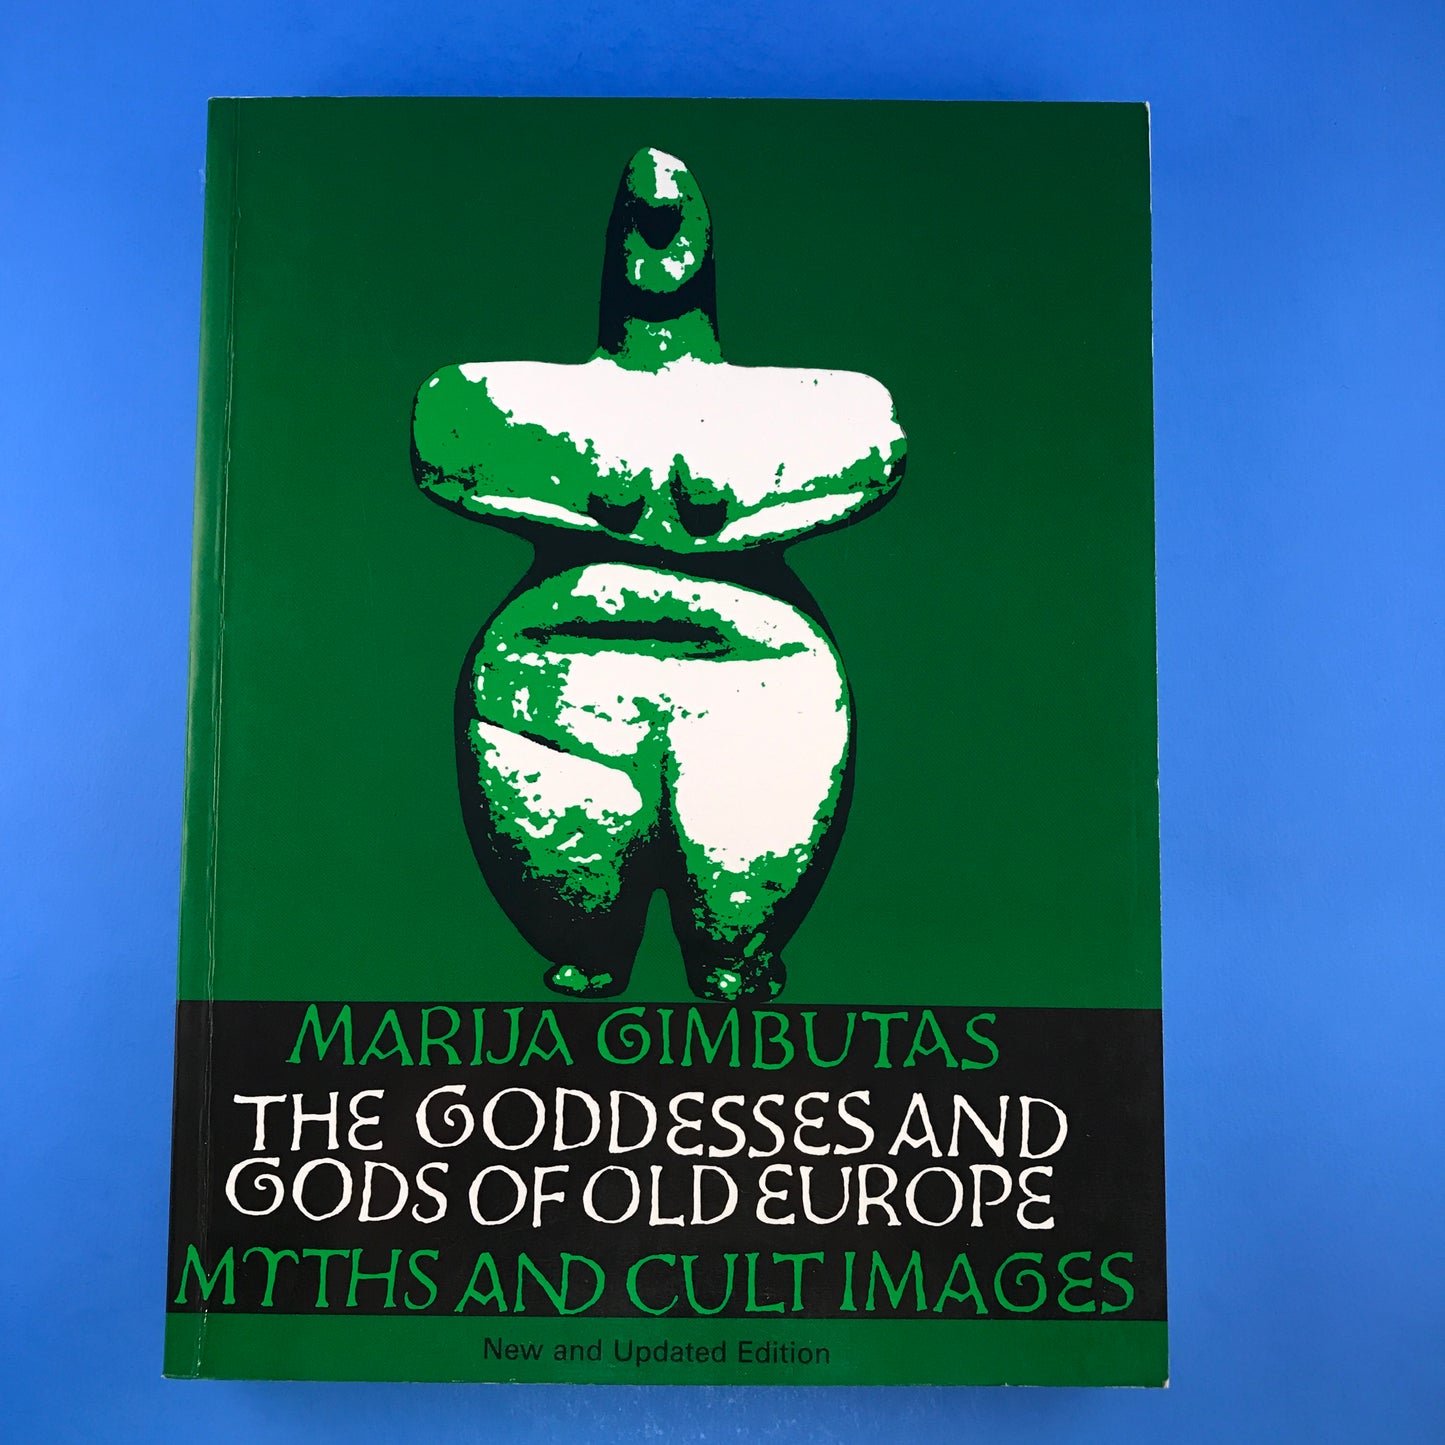 The Goddesses and Gods of Old Europe: Myths and Cult Images